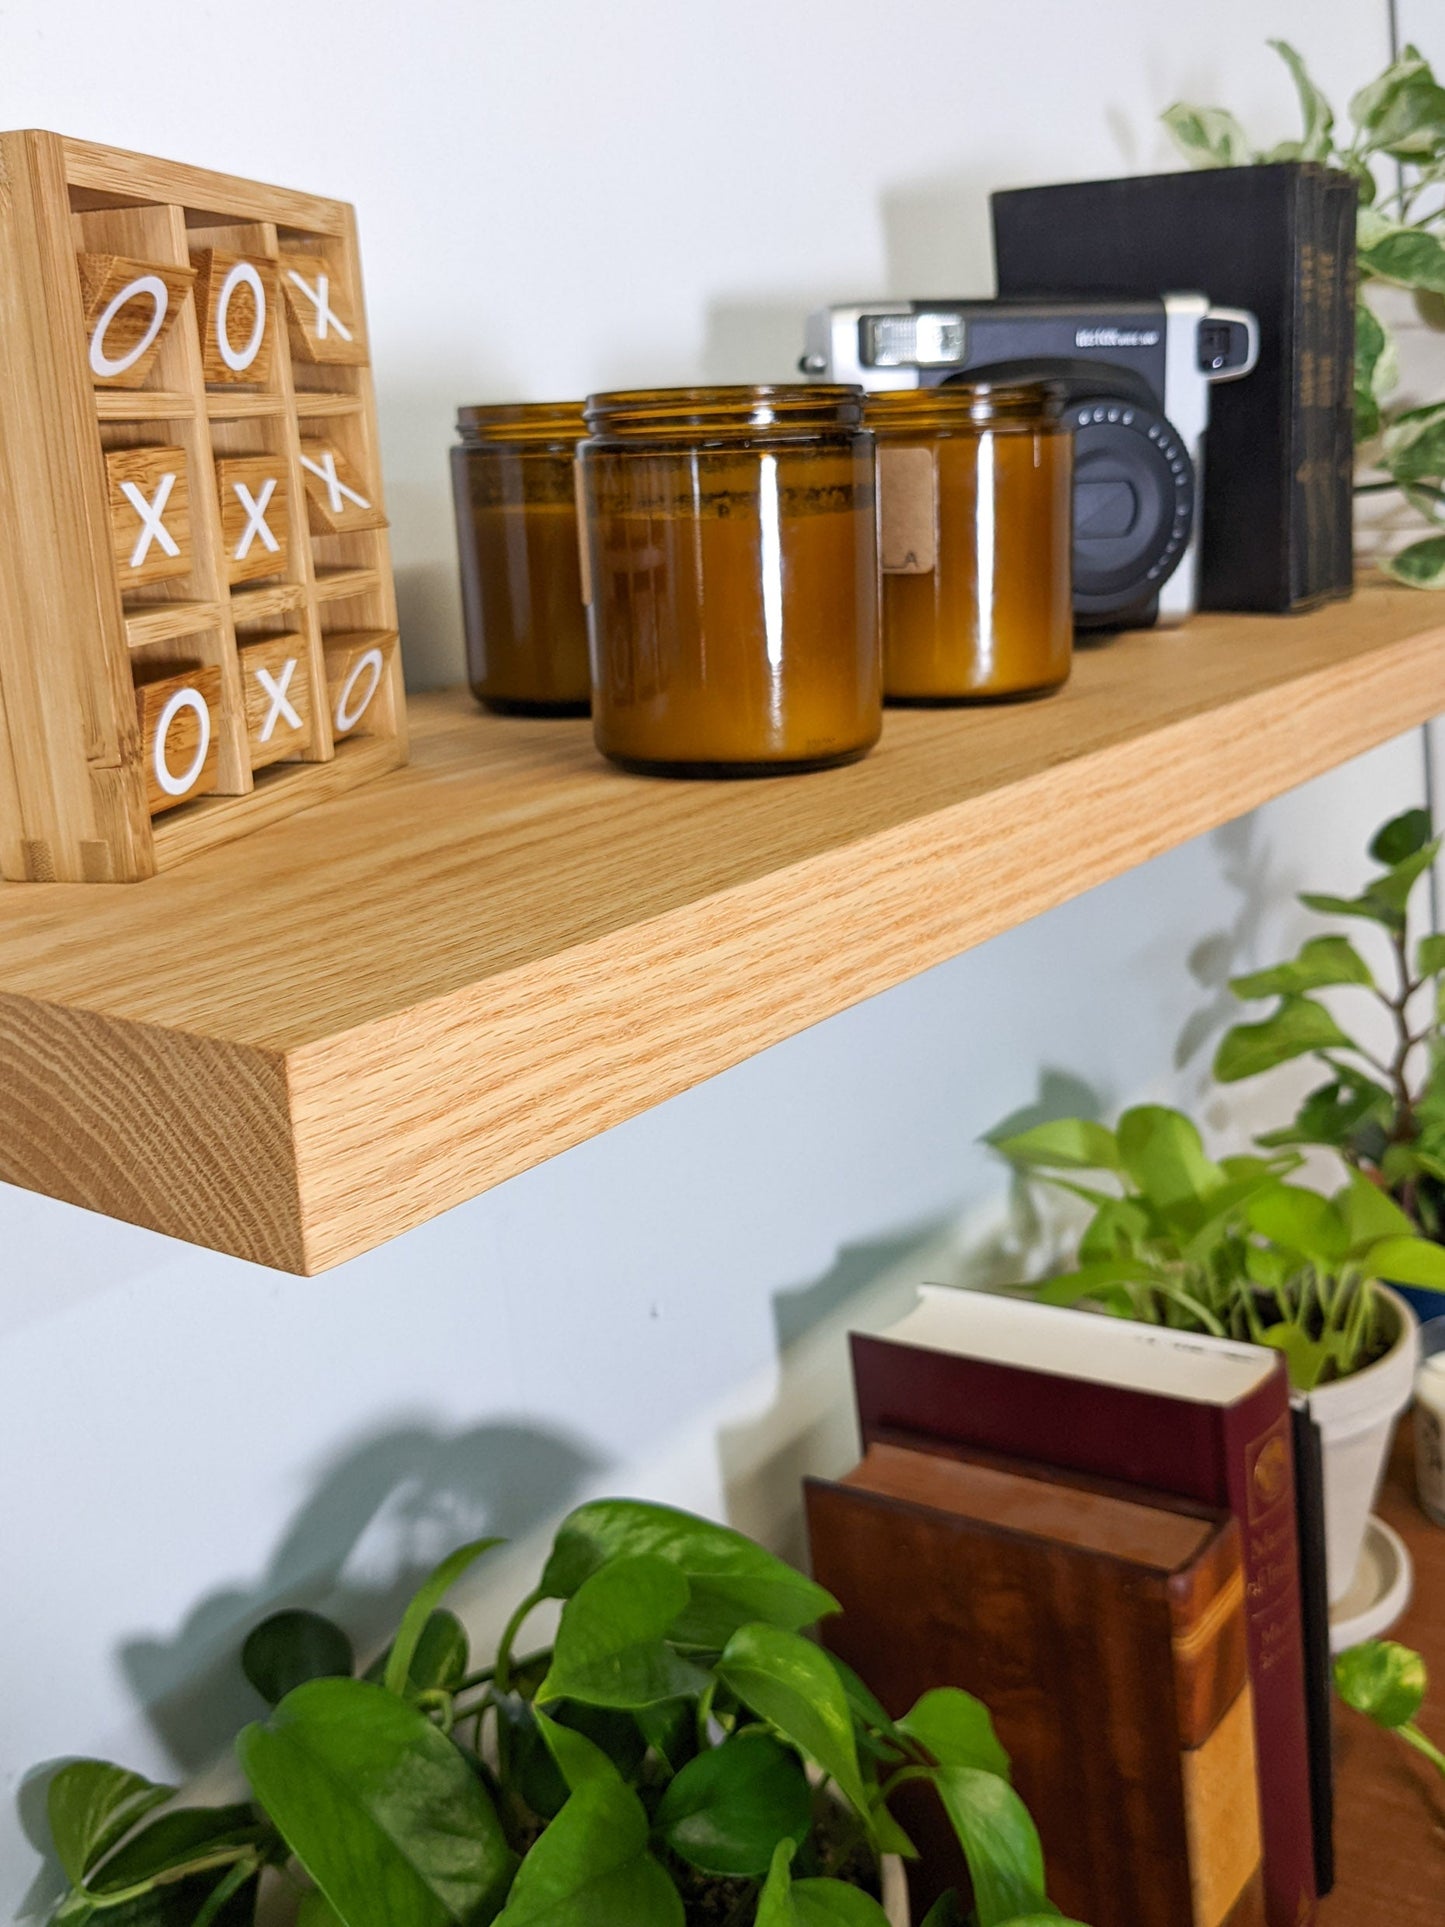 The side view of a long oak floating shelf that displays three amber candles, a decorative wooden tic-tac-toe game, three vintage books, and a vintage camera.